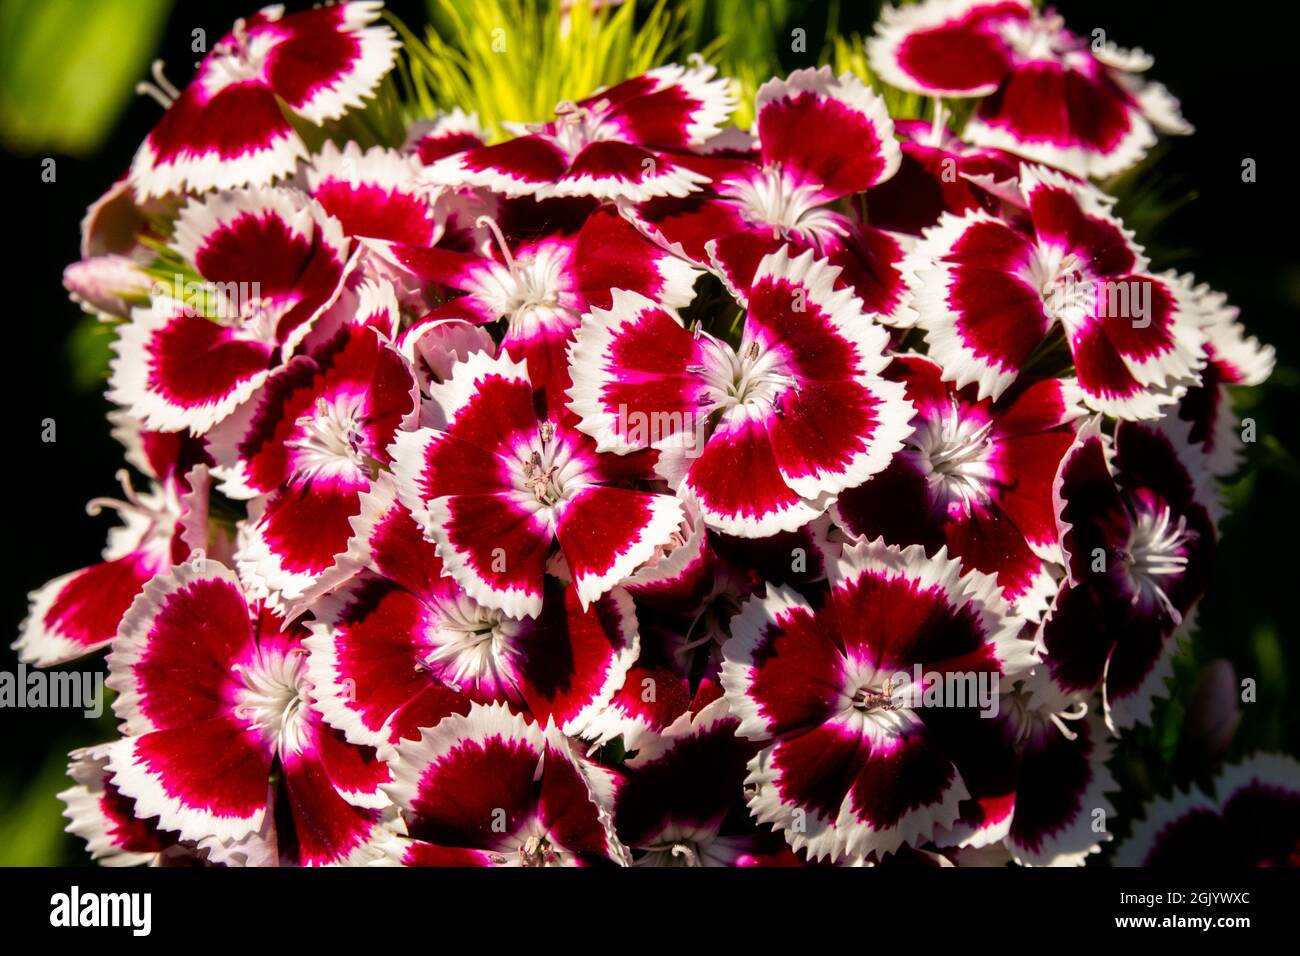 White red flowers Dianthus Sweet William flower Stock Photo